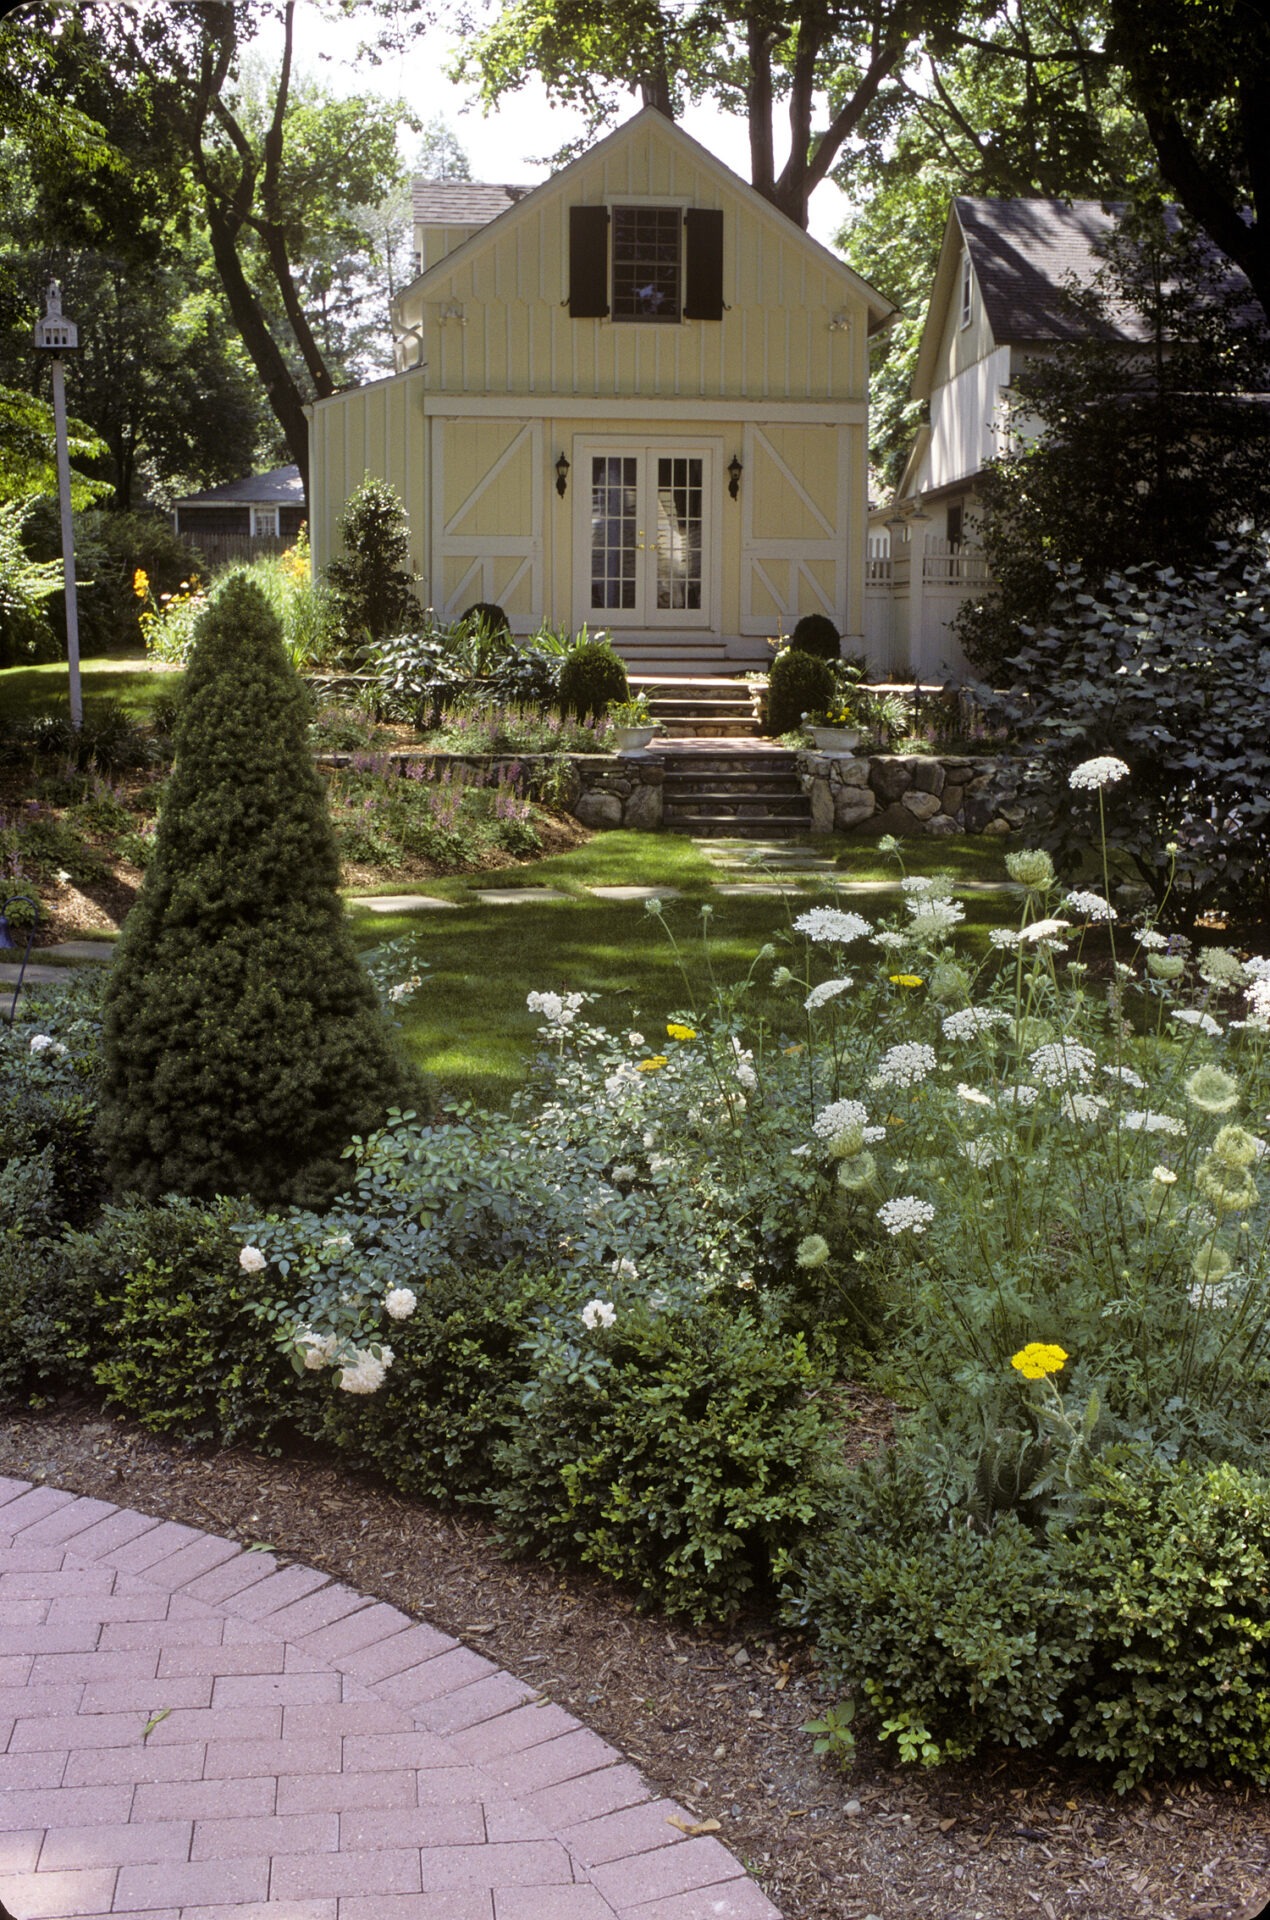 A quaint yellow house with white trim stands behind a lush garden with various plants and flowers, alongside a brick pathway, in a serene setting.